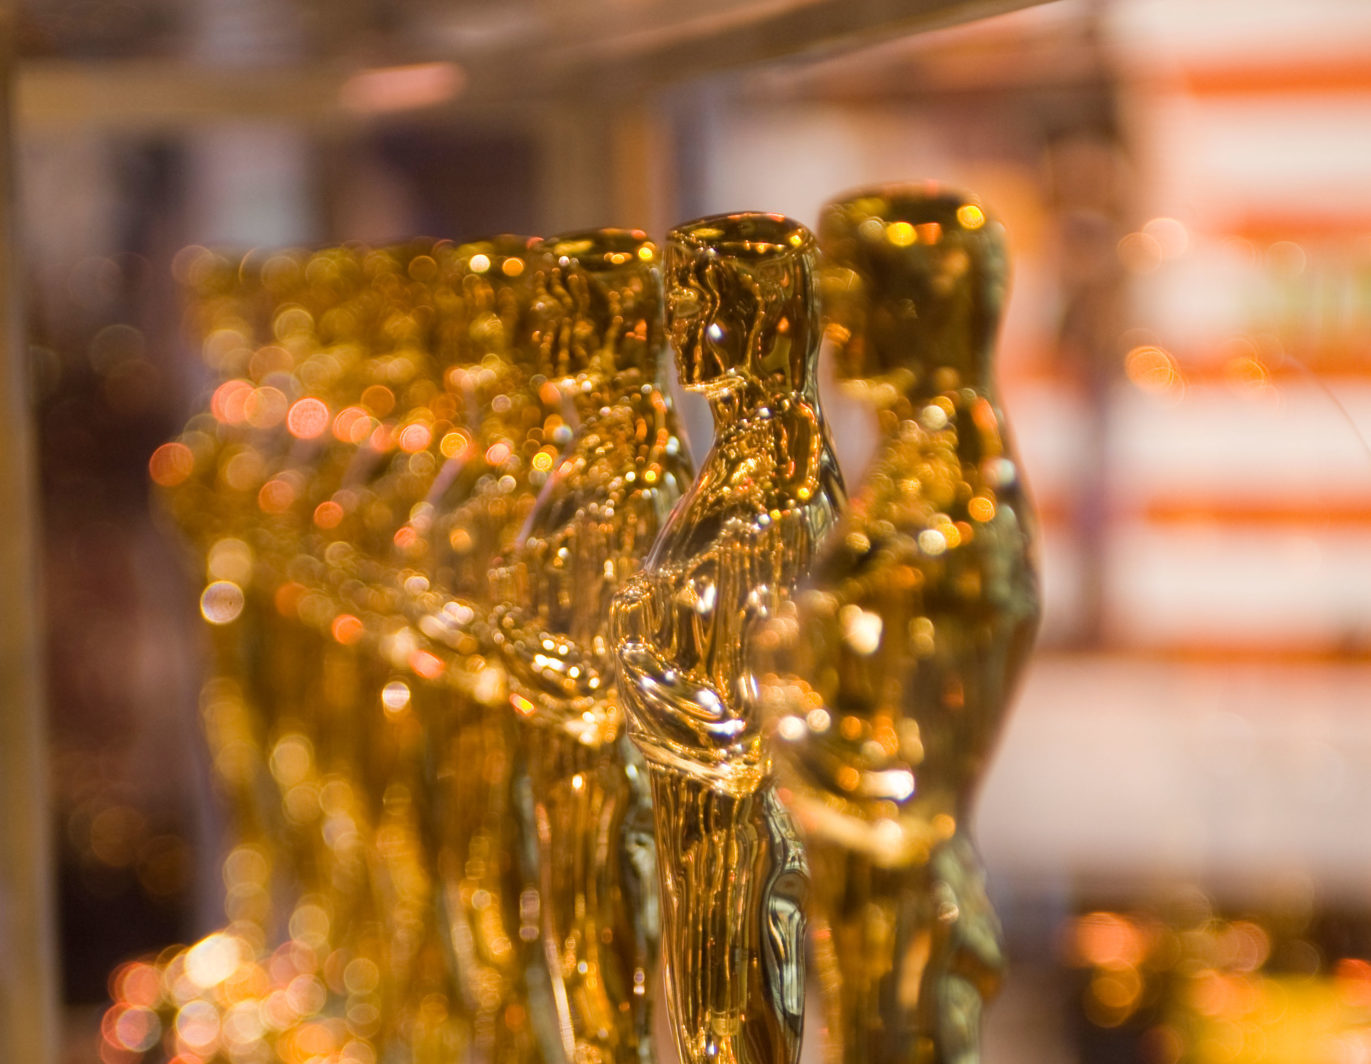 Oscar statuettes to be presented to winners at an Academy Award presentation in 2008